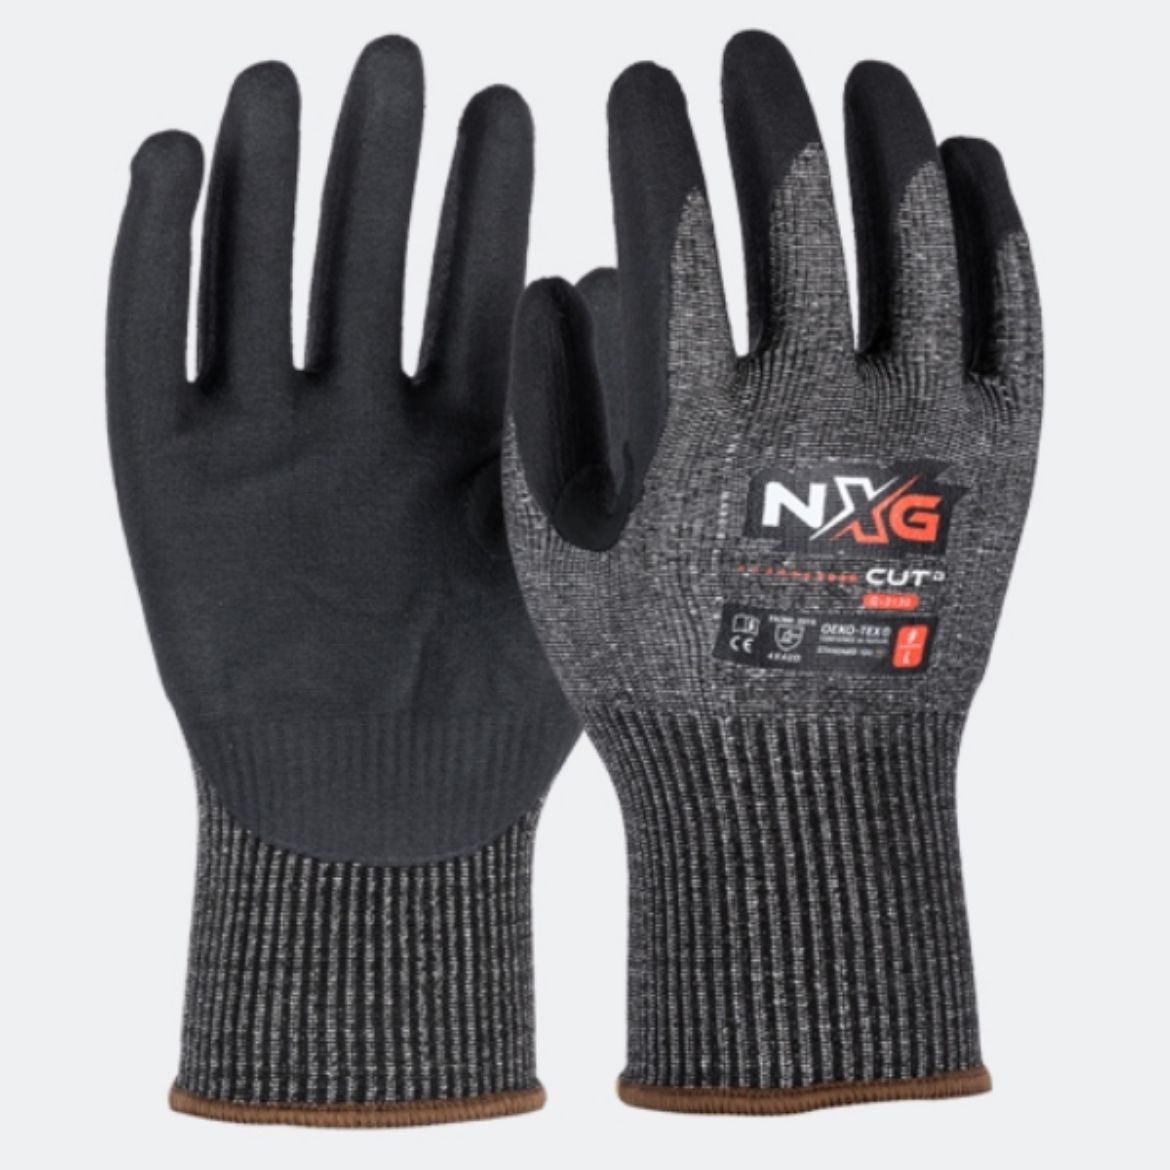 Picture of GLOVES, NXG CUT D HD, BLACK NITRILE.  AVAILABLE IN SIZES 6 - 12